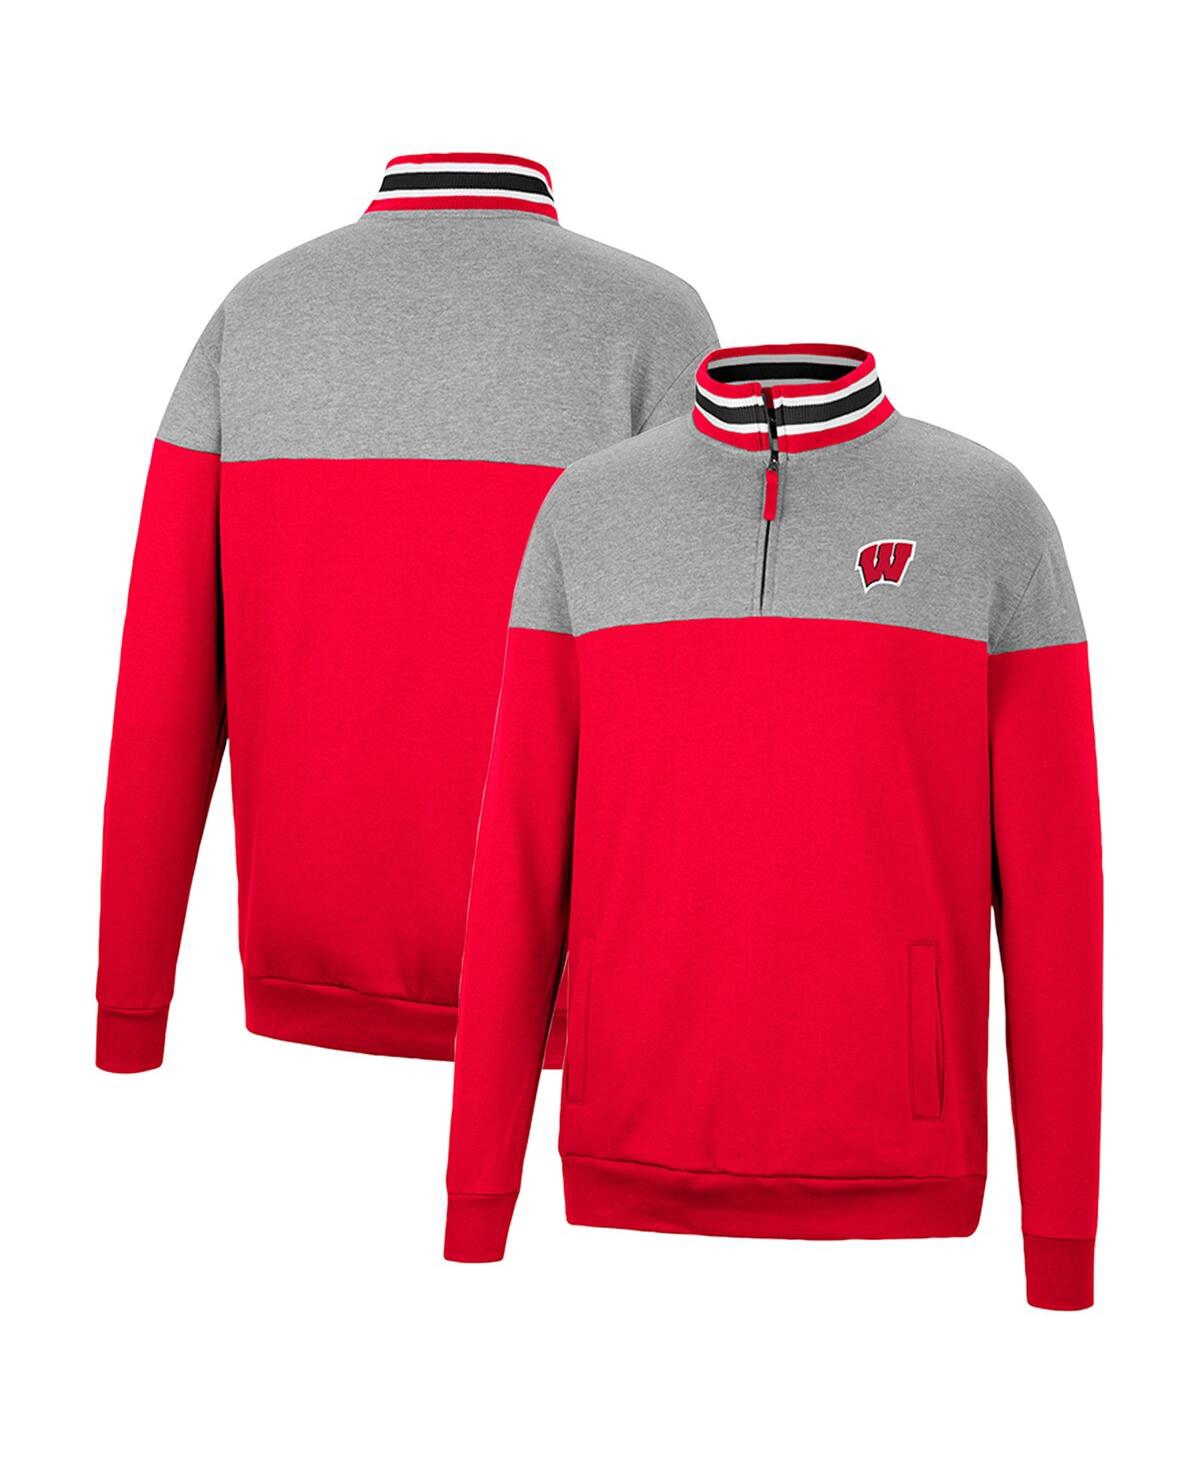 Colosseum Men's  Red, Heather Gray Wisconsin Badgers Be The Ball Quarter-zip Top In Red,heather Gray